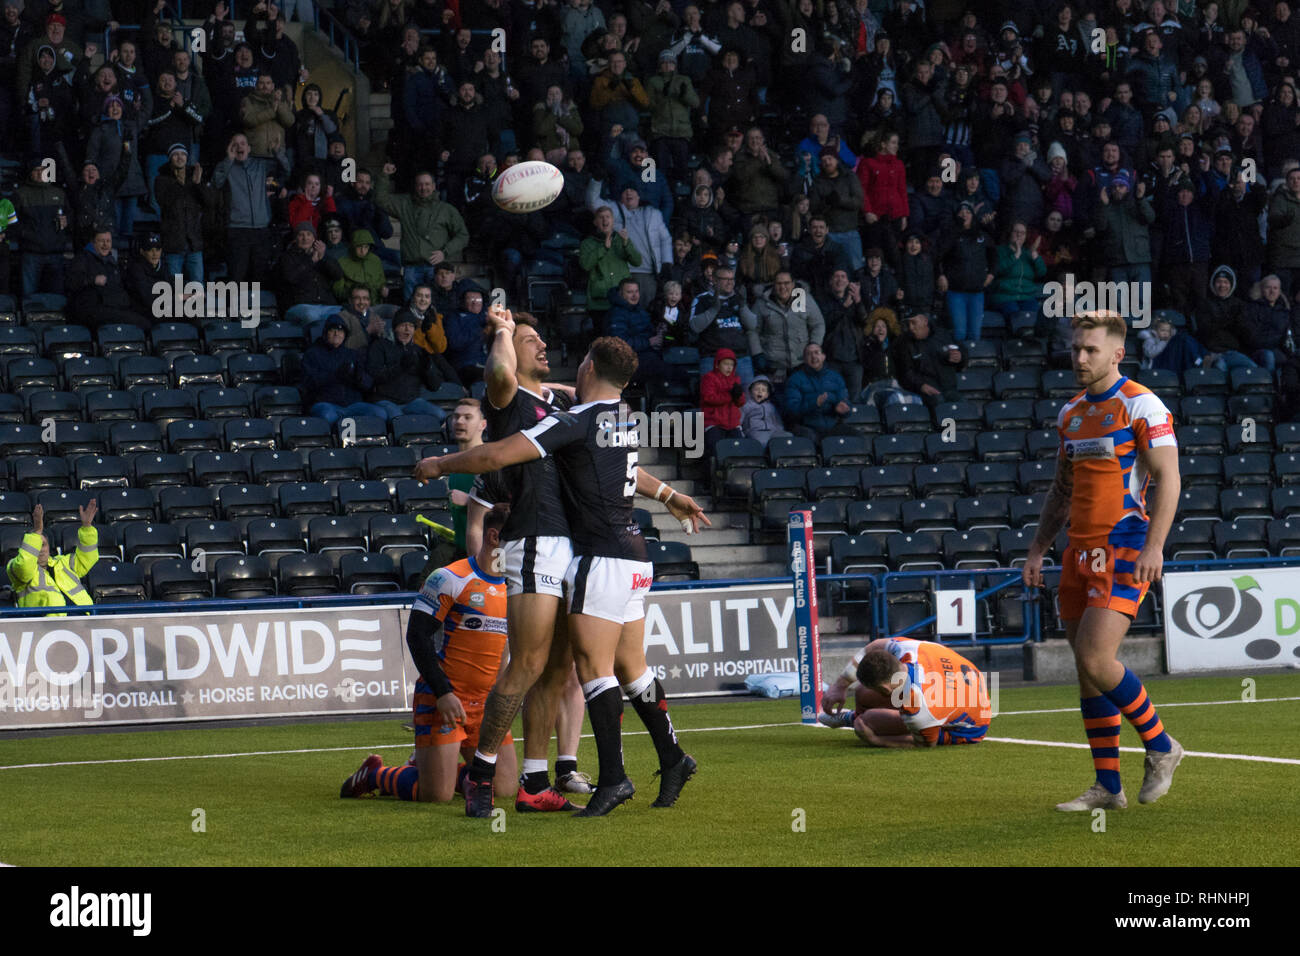 Anthony Gelling Celebrates his 2nd try of the afternoon. Widnes Vikings vs Halifax RLFC 3rd February 2019 Stock Photo